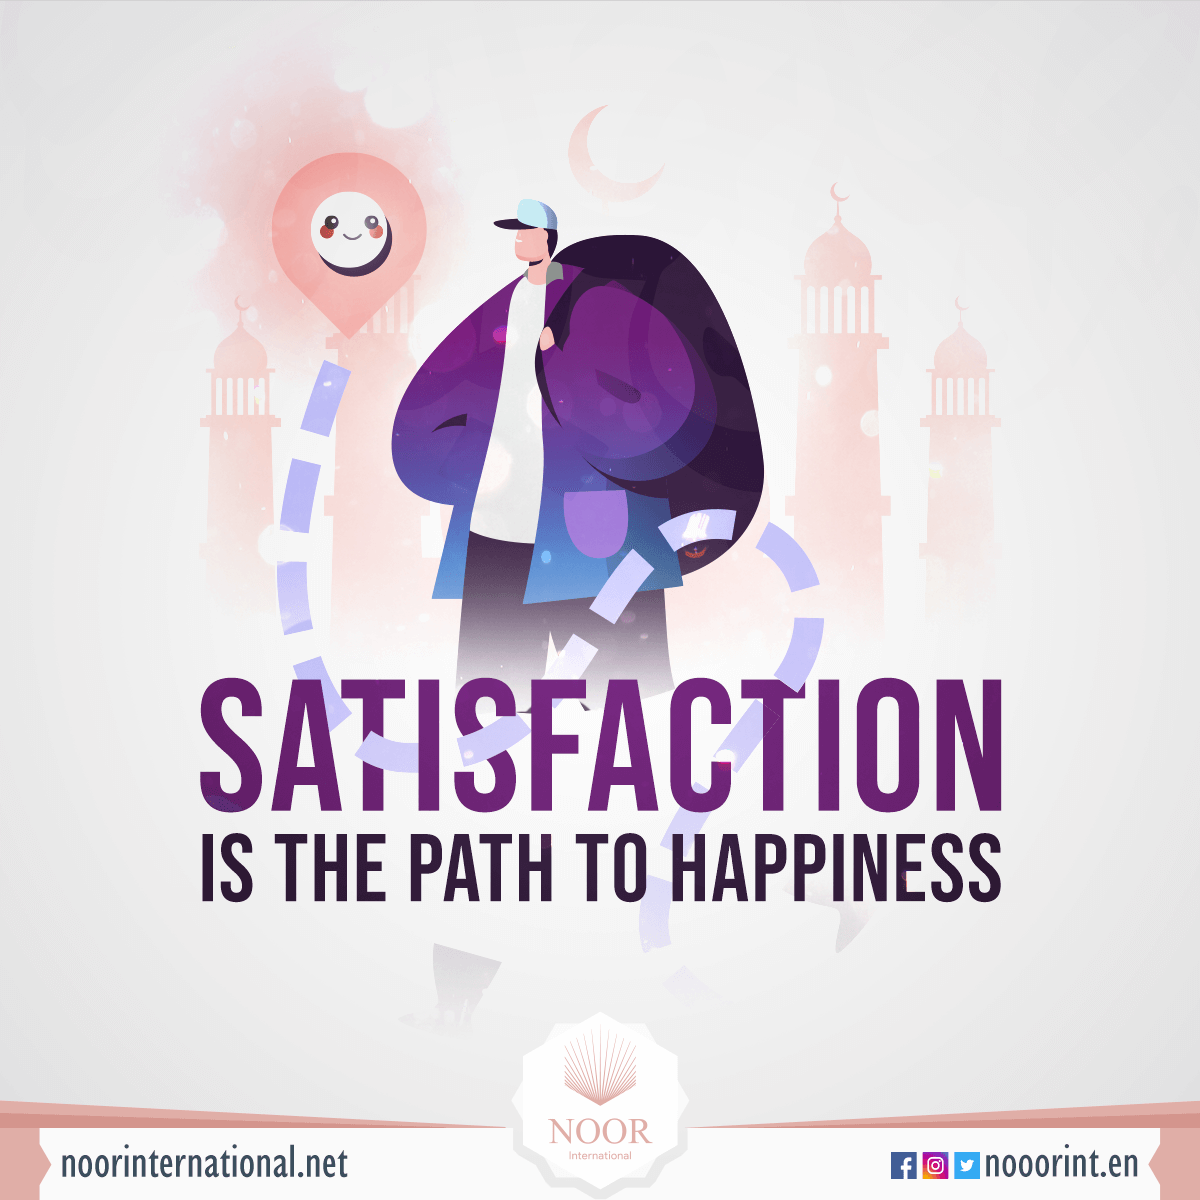 Happiness in the Qur'an